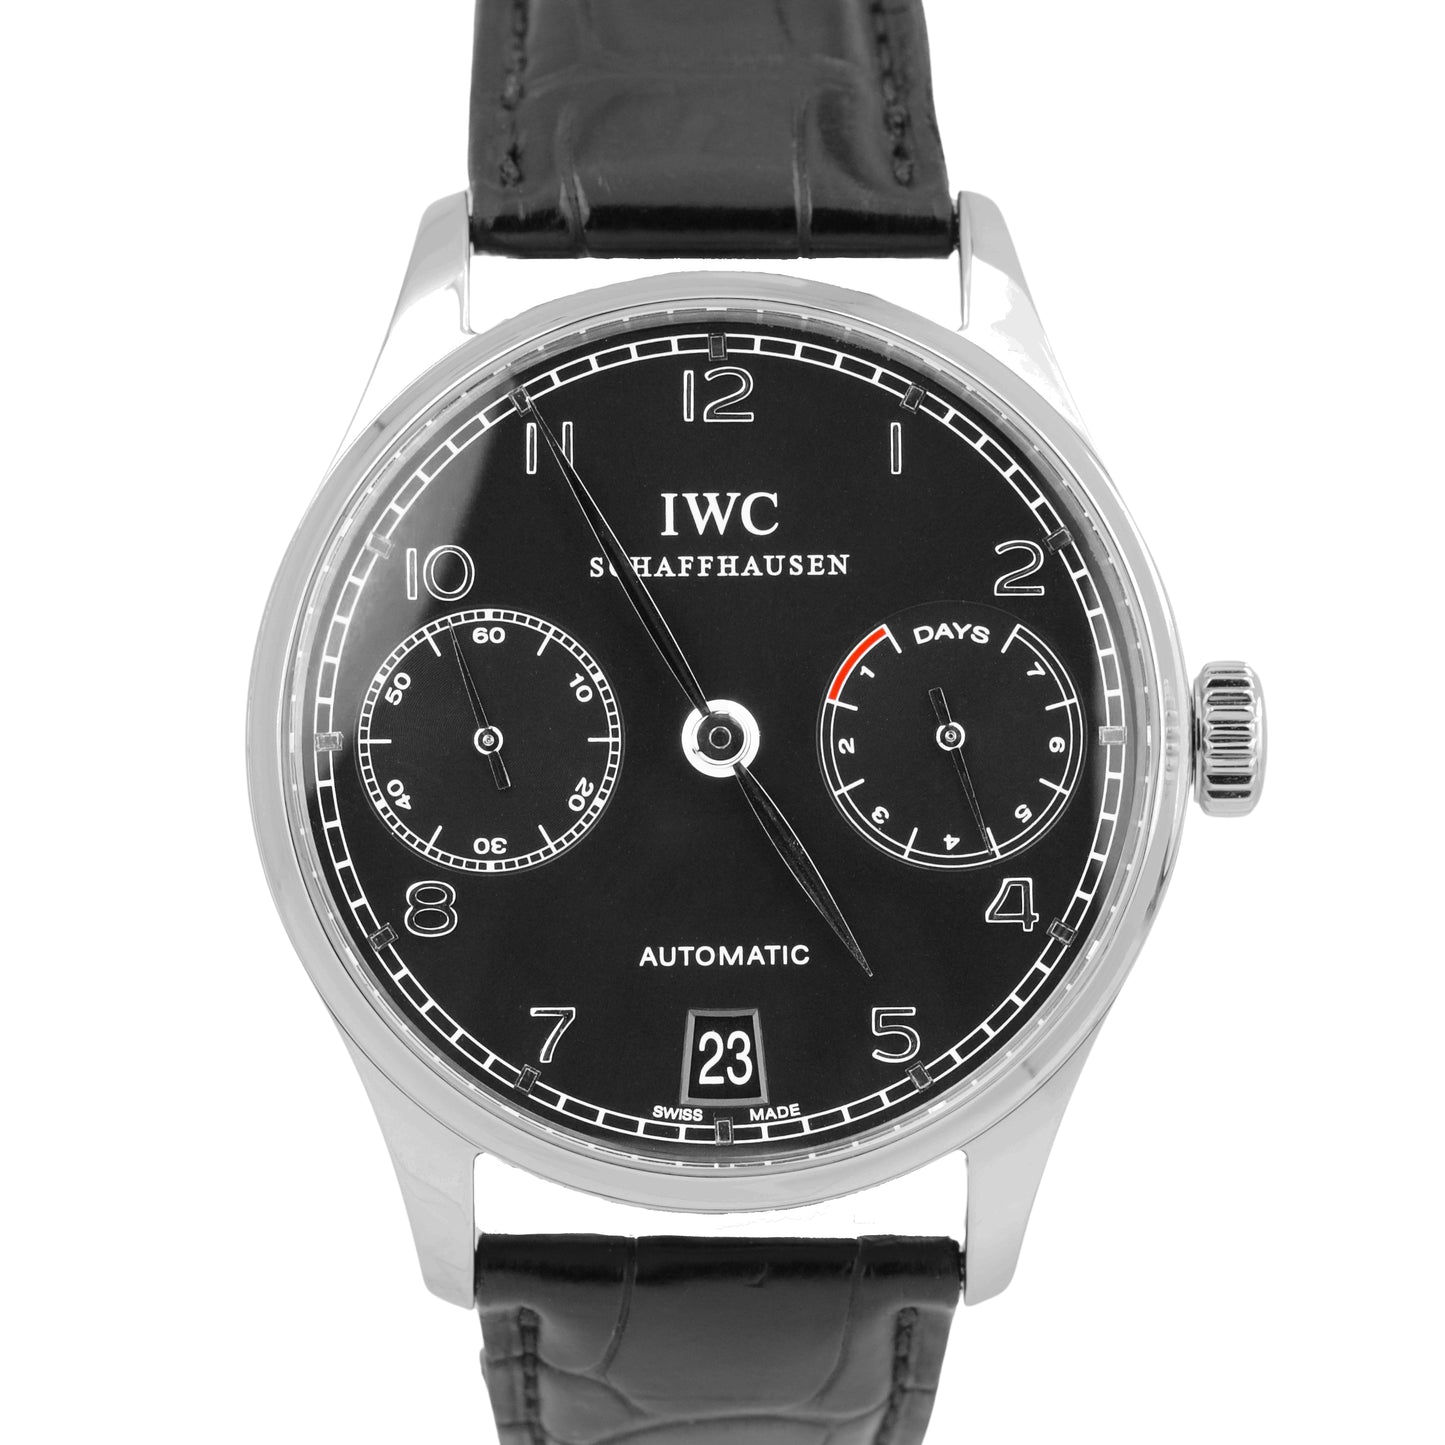 MINT IWC Portugieser 7-Day Automatic Black Stainless Steel 42.3mm IW500703 Watch